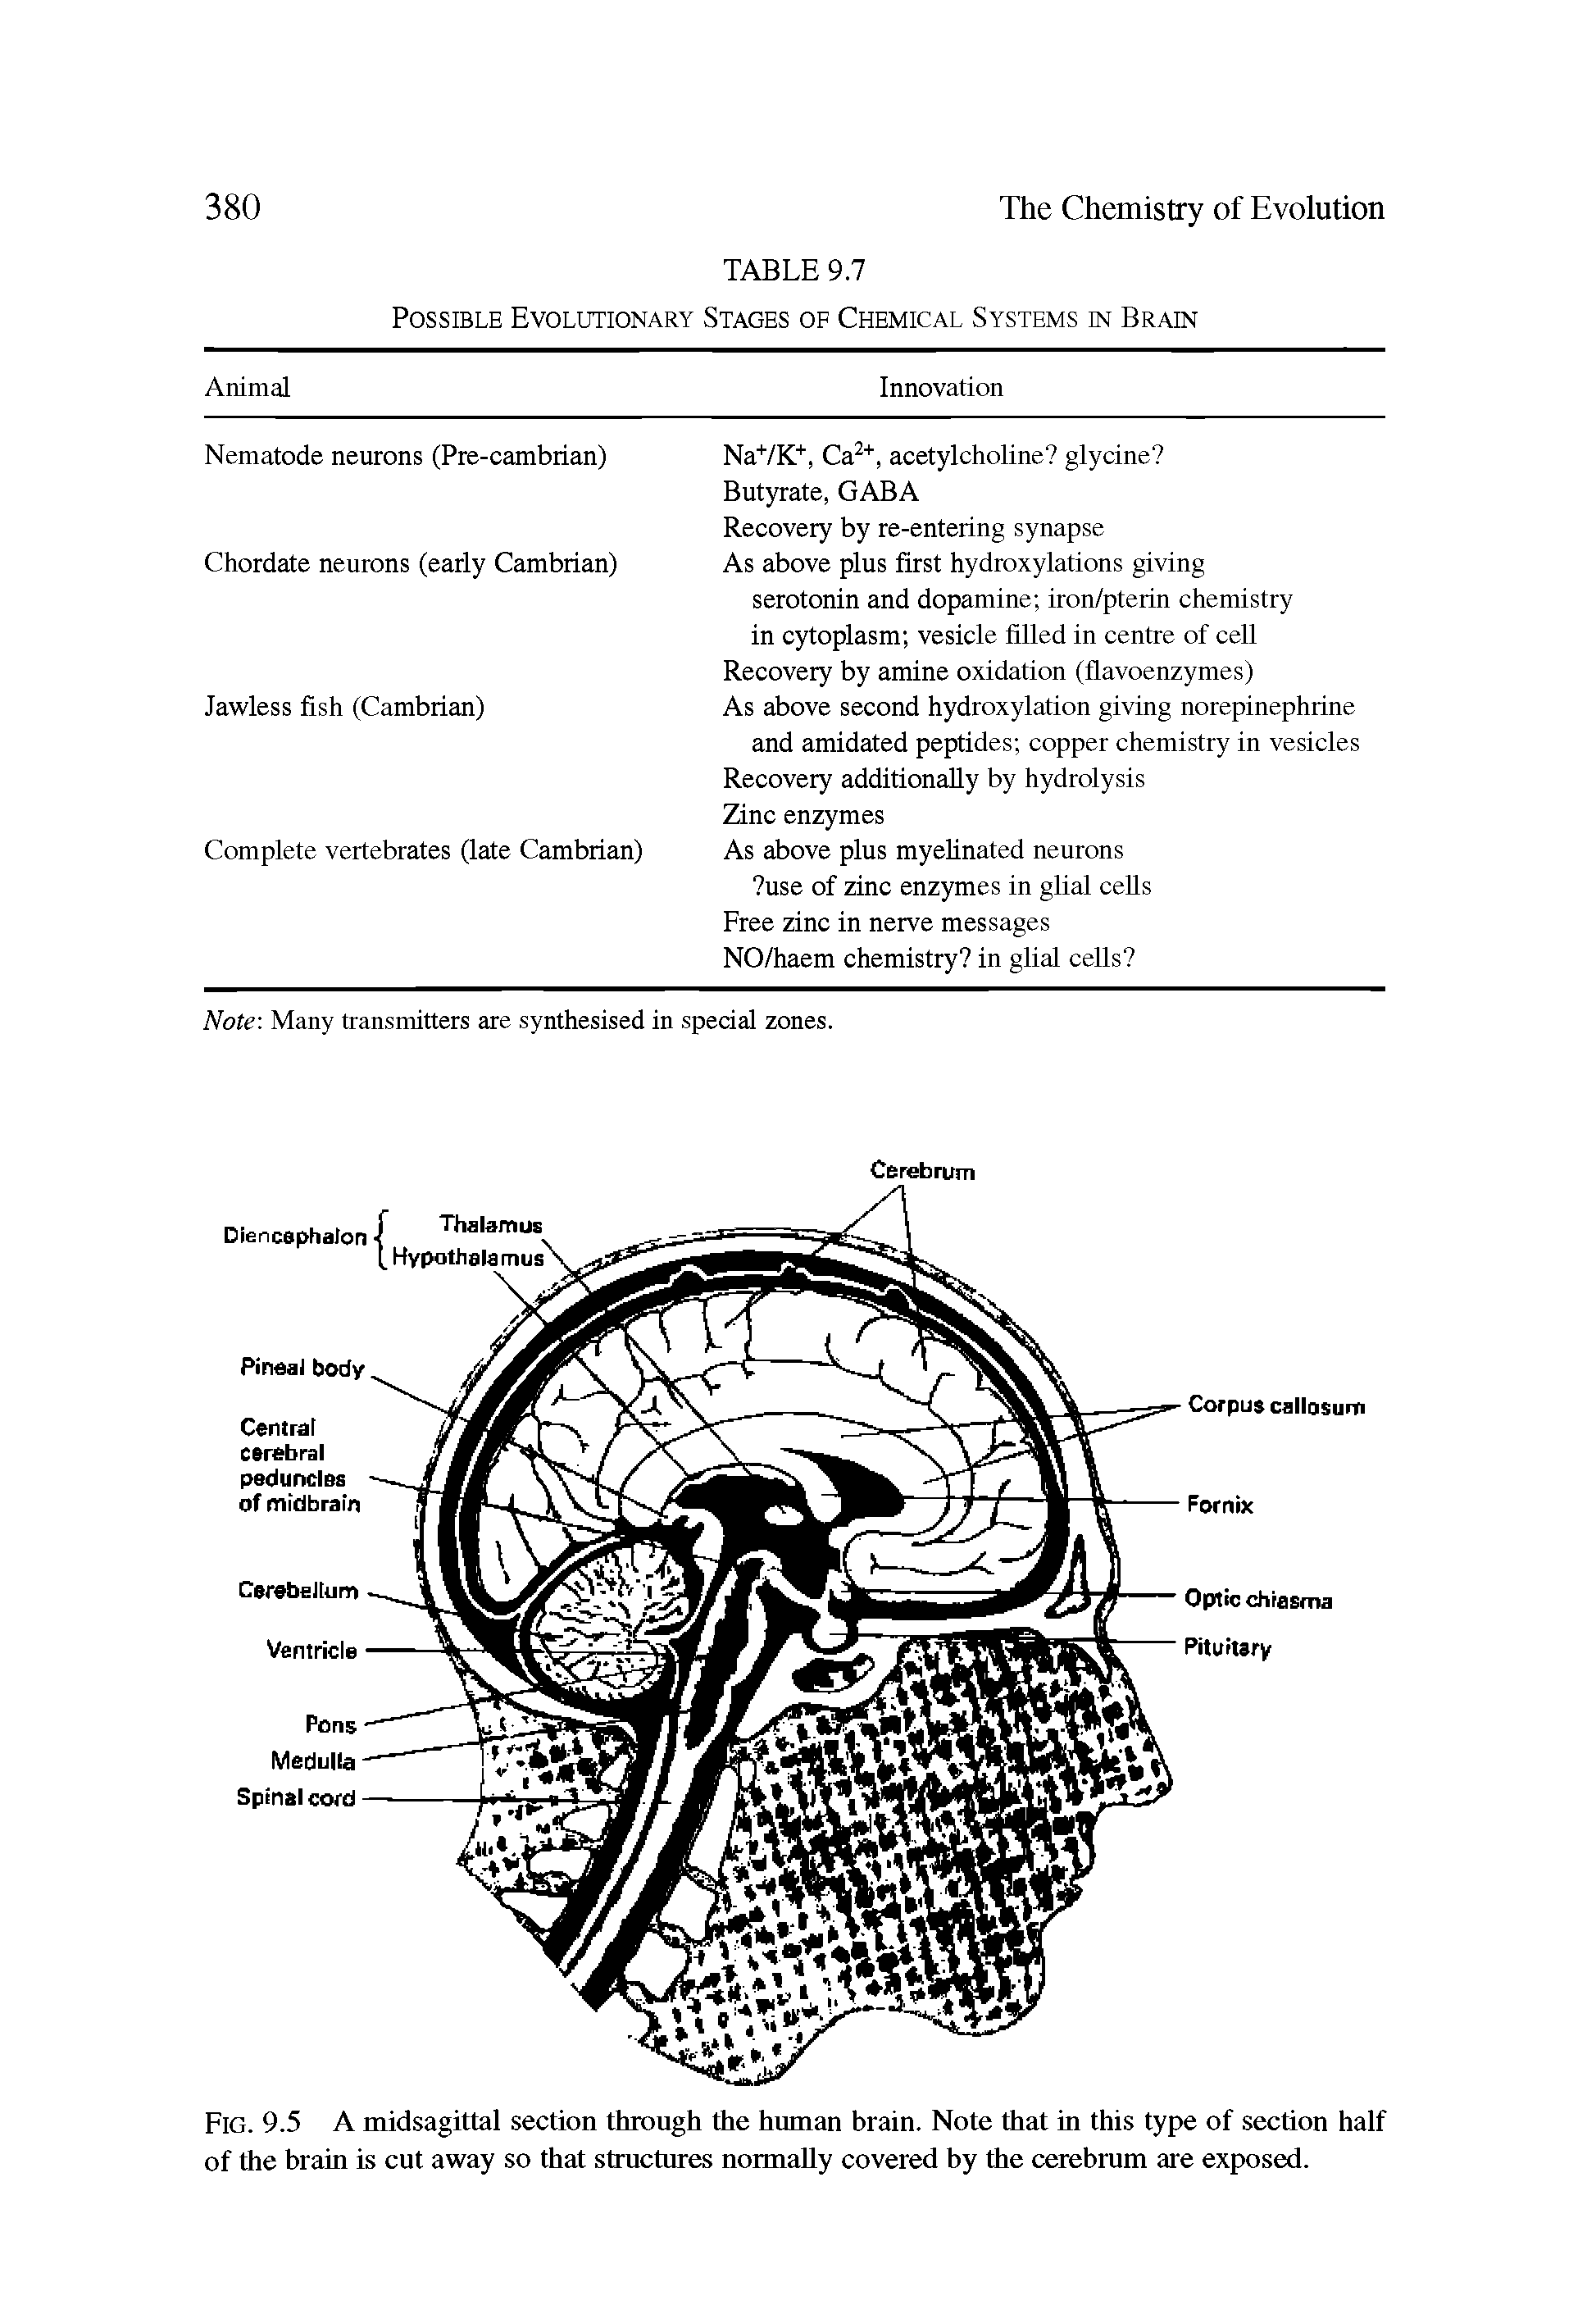 Fig. 9.5 A midsagittal section through the human brain. Note that in this type of section half of the brain is cut away so that structures normally covered by the cerebrum are exposed.